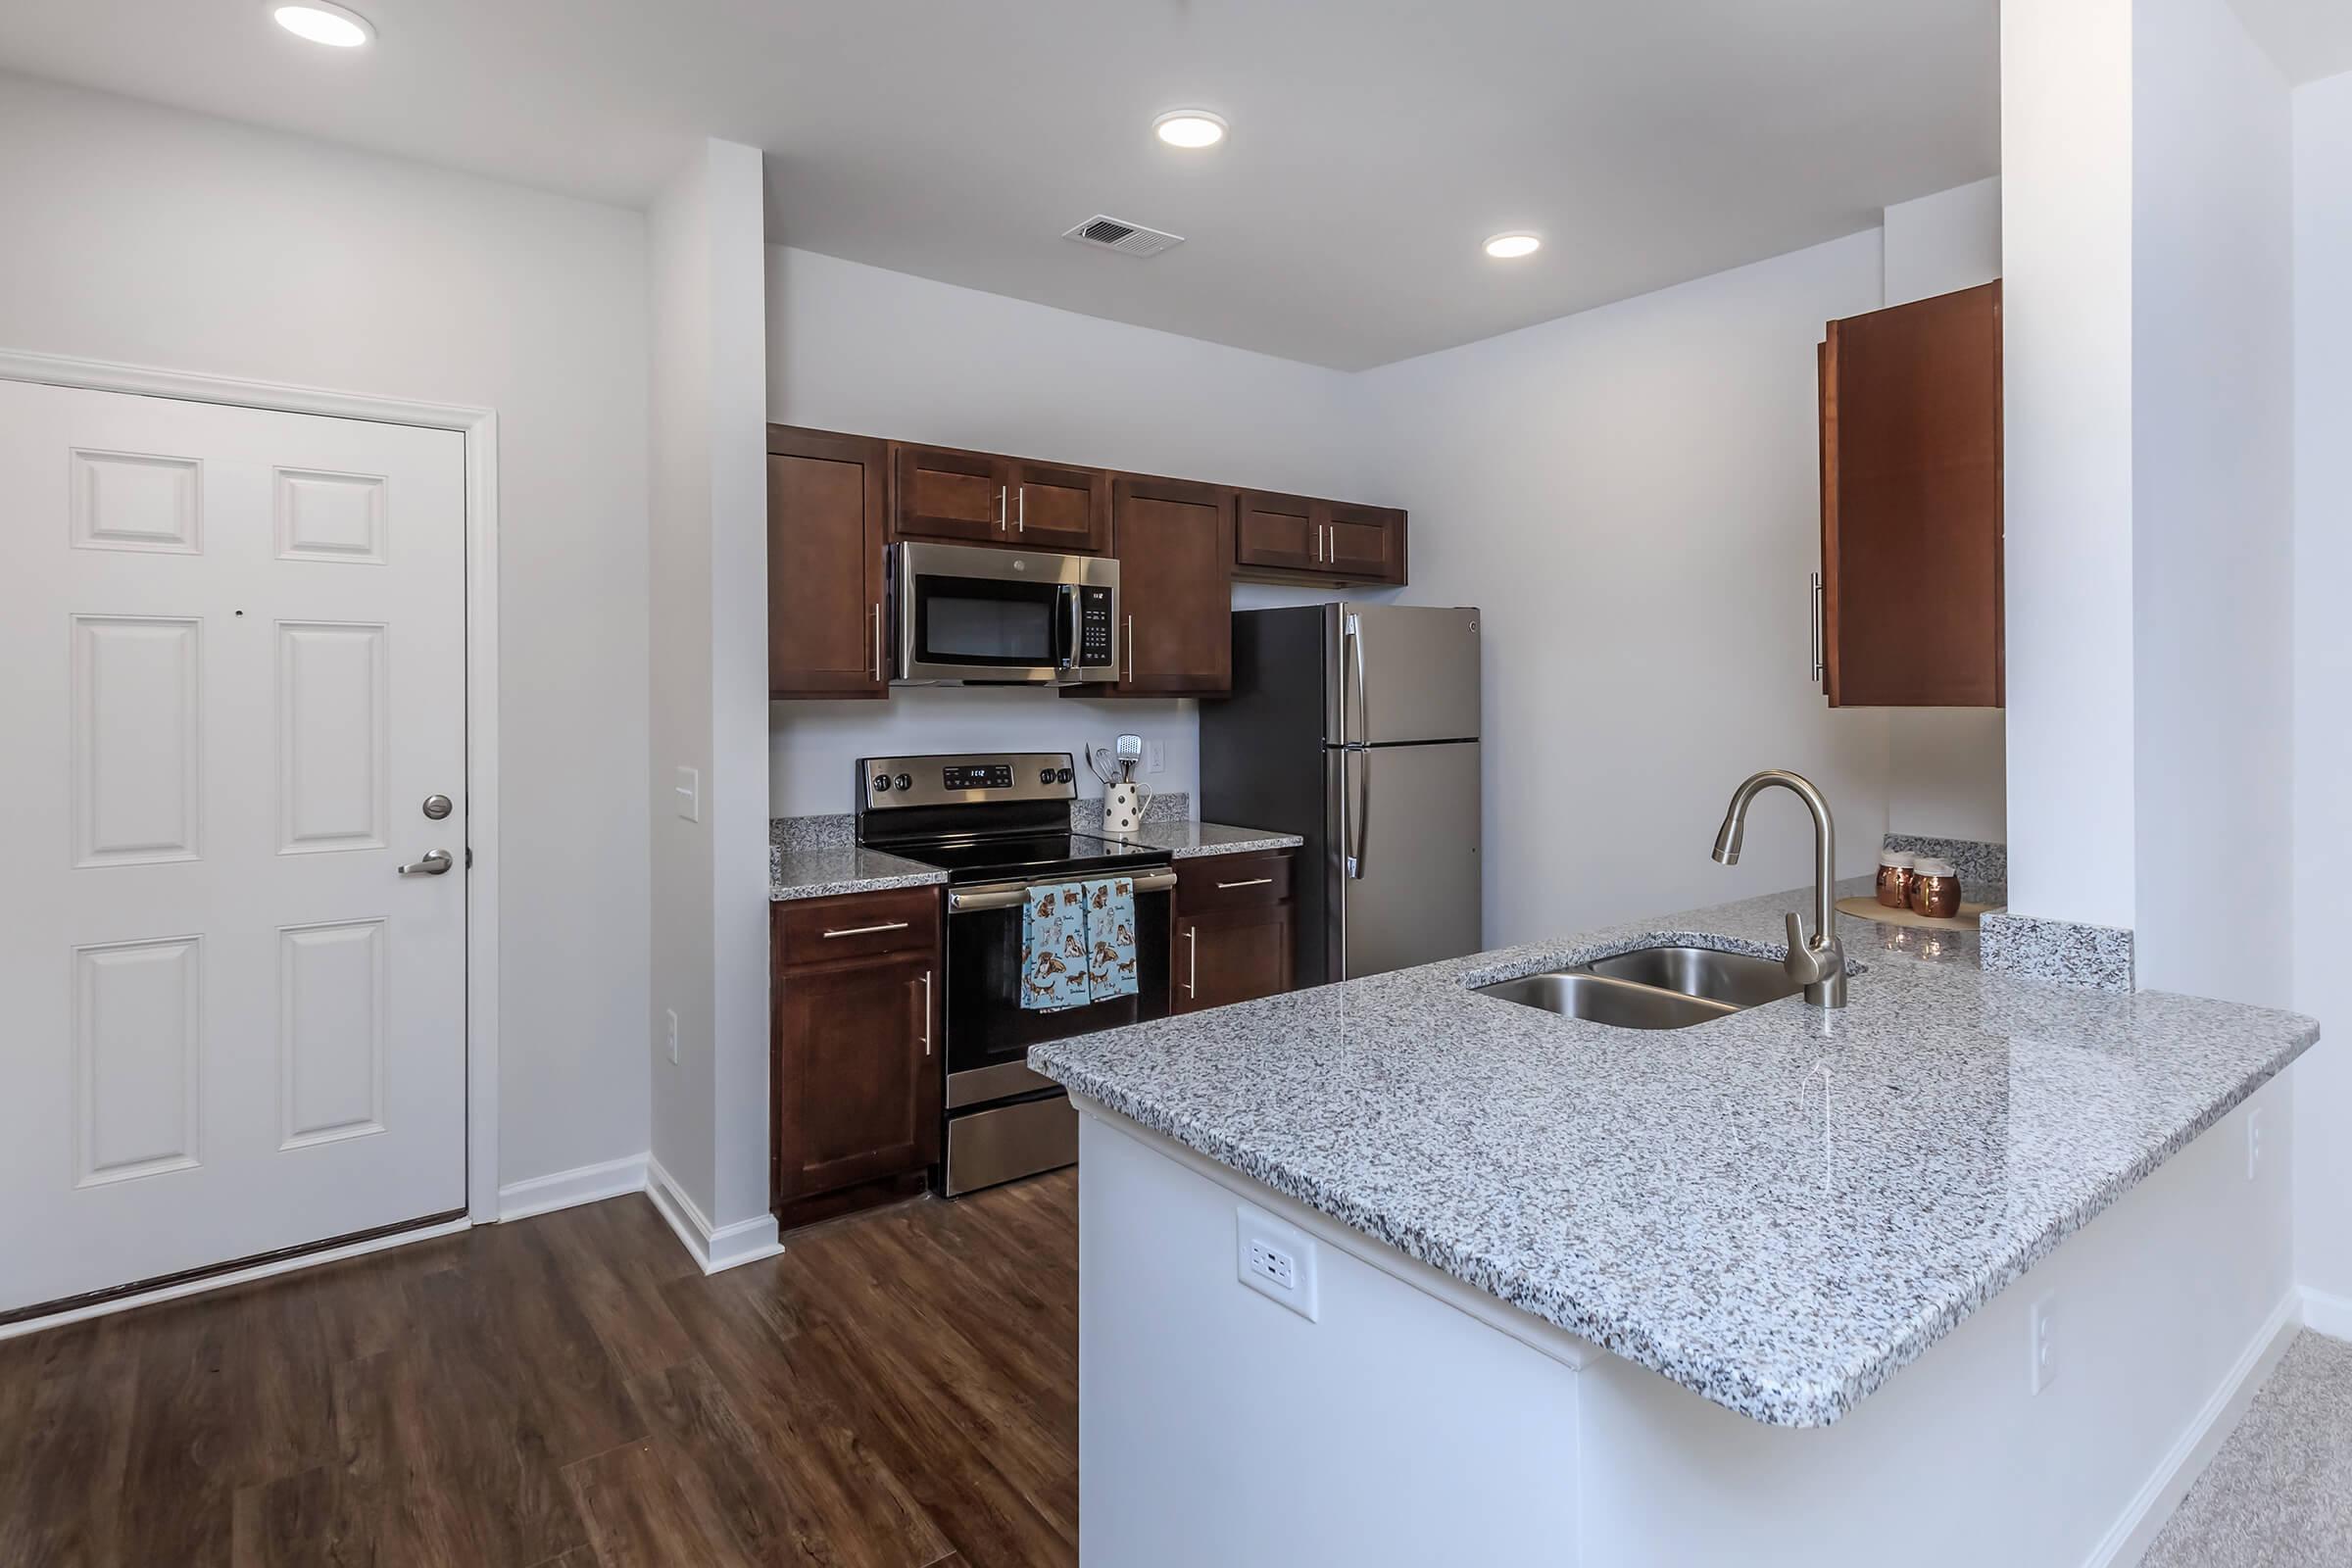 Clarendon Offers A Modern Kitchen In Riverstone Apartments At Long Shoals In Arden, NC